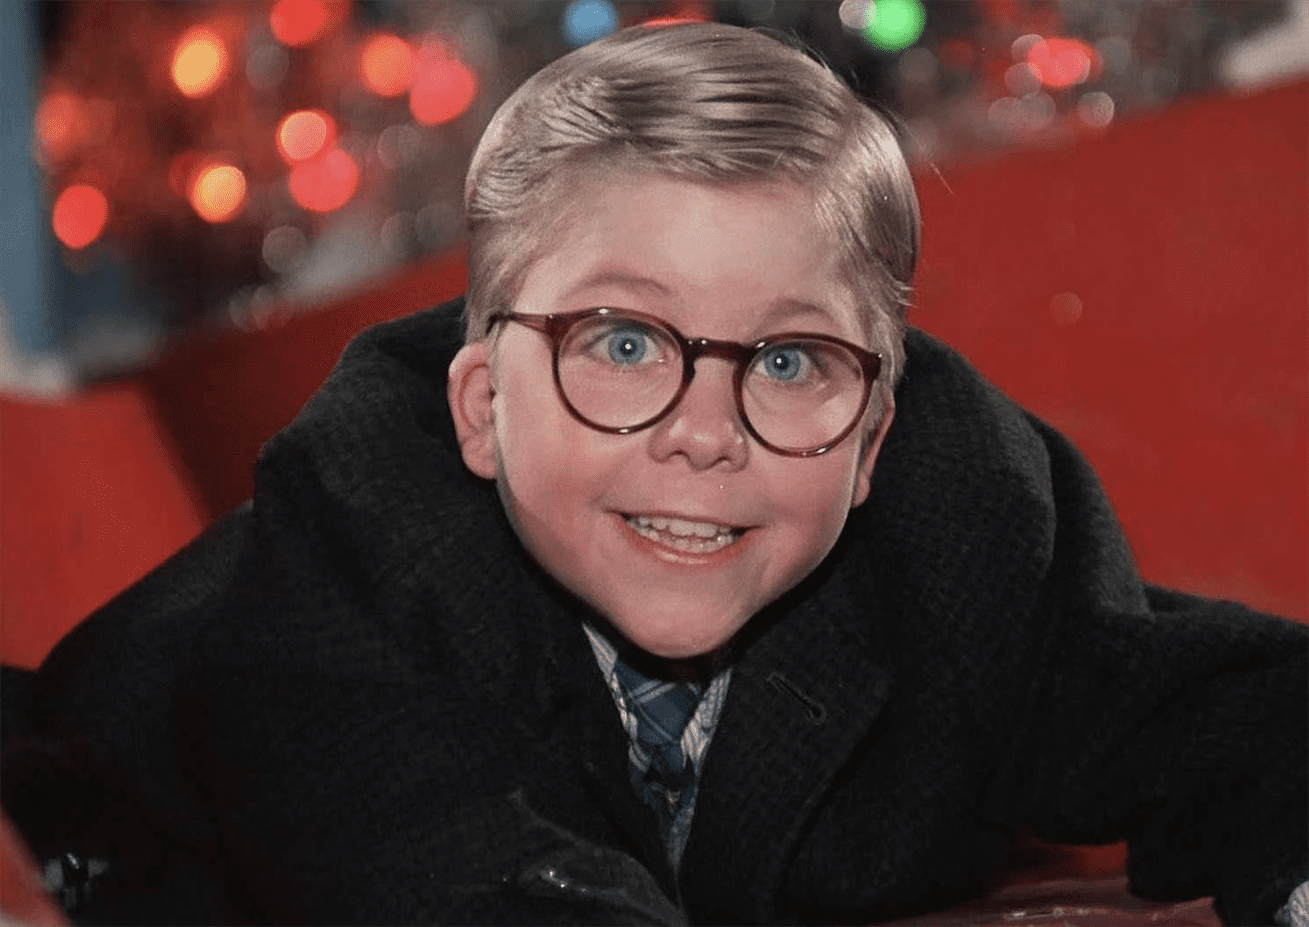 A young boy (Peter Billingsley) tries to convince his family to get him the perfect present in "A Christmas Story." Photo courtesy of Metro-Goldwyn-Mayer